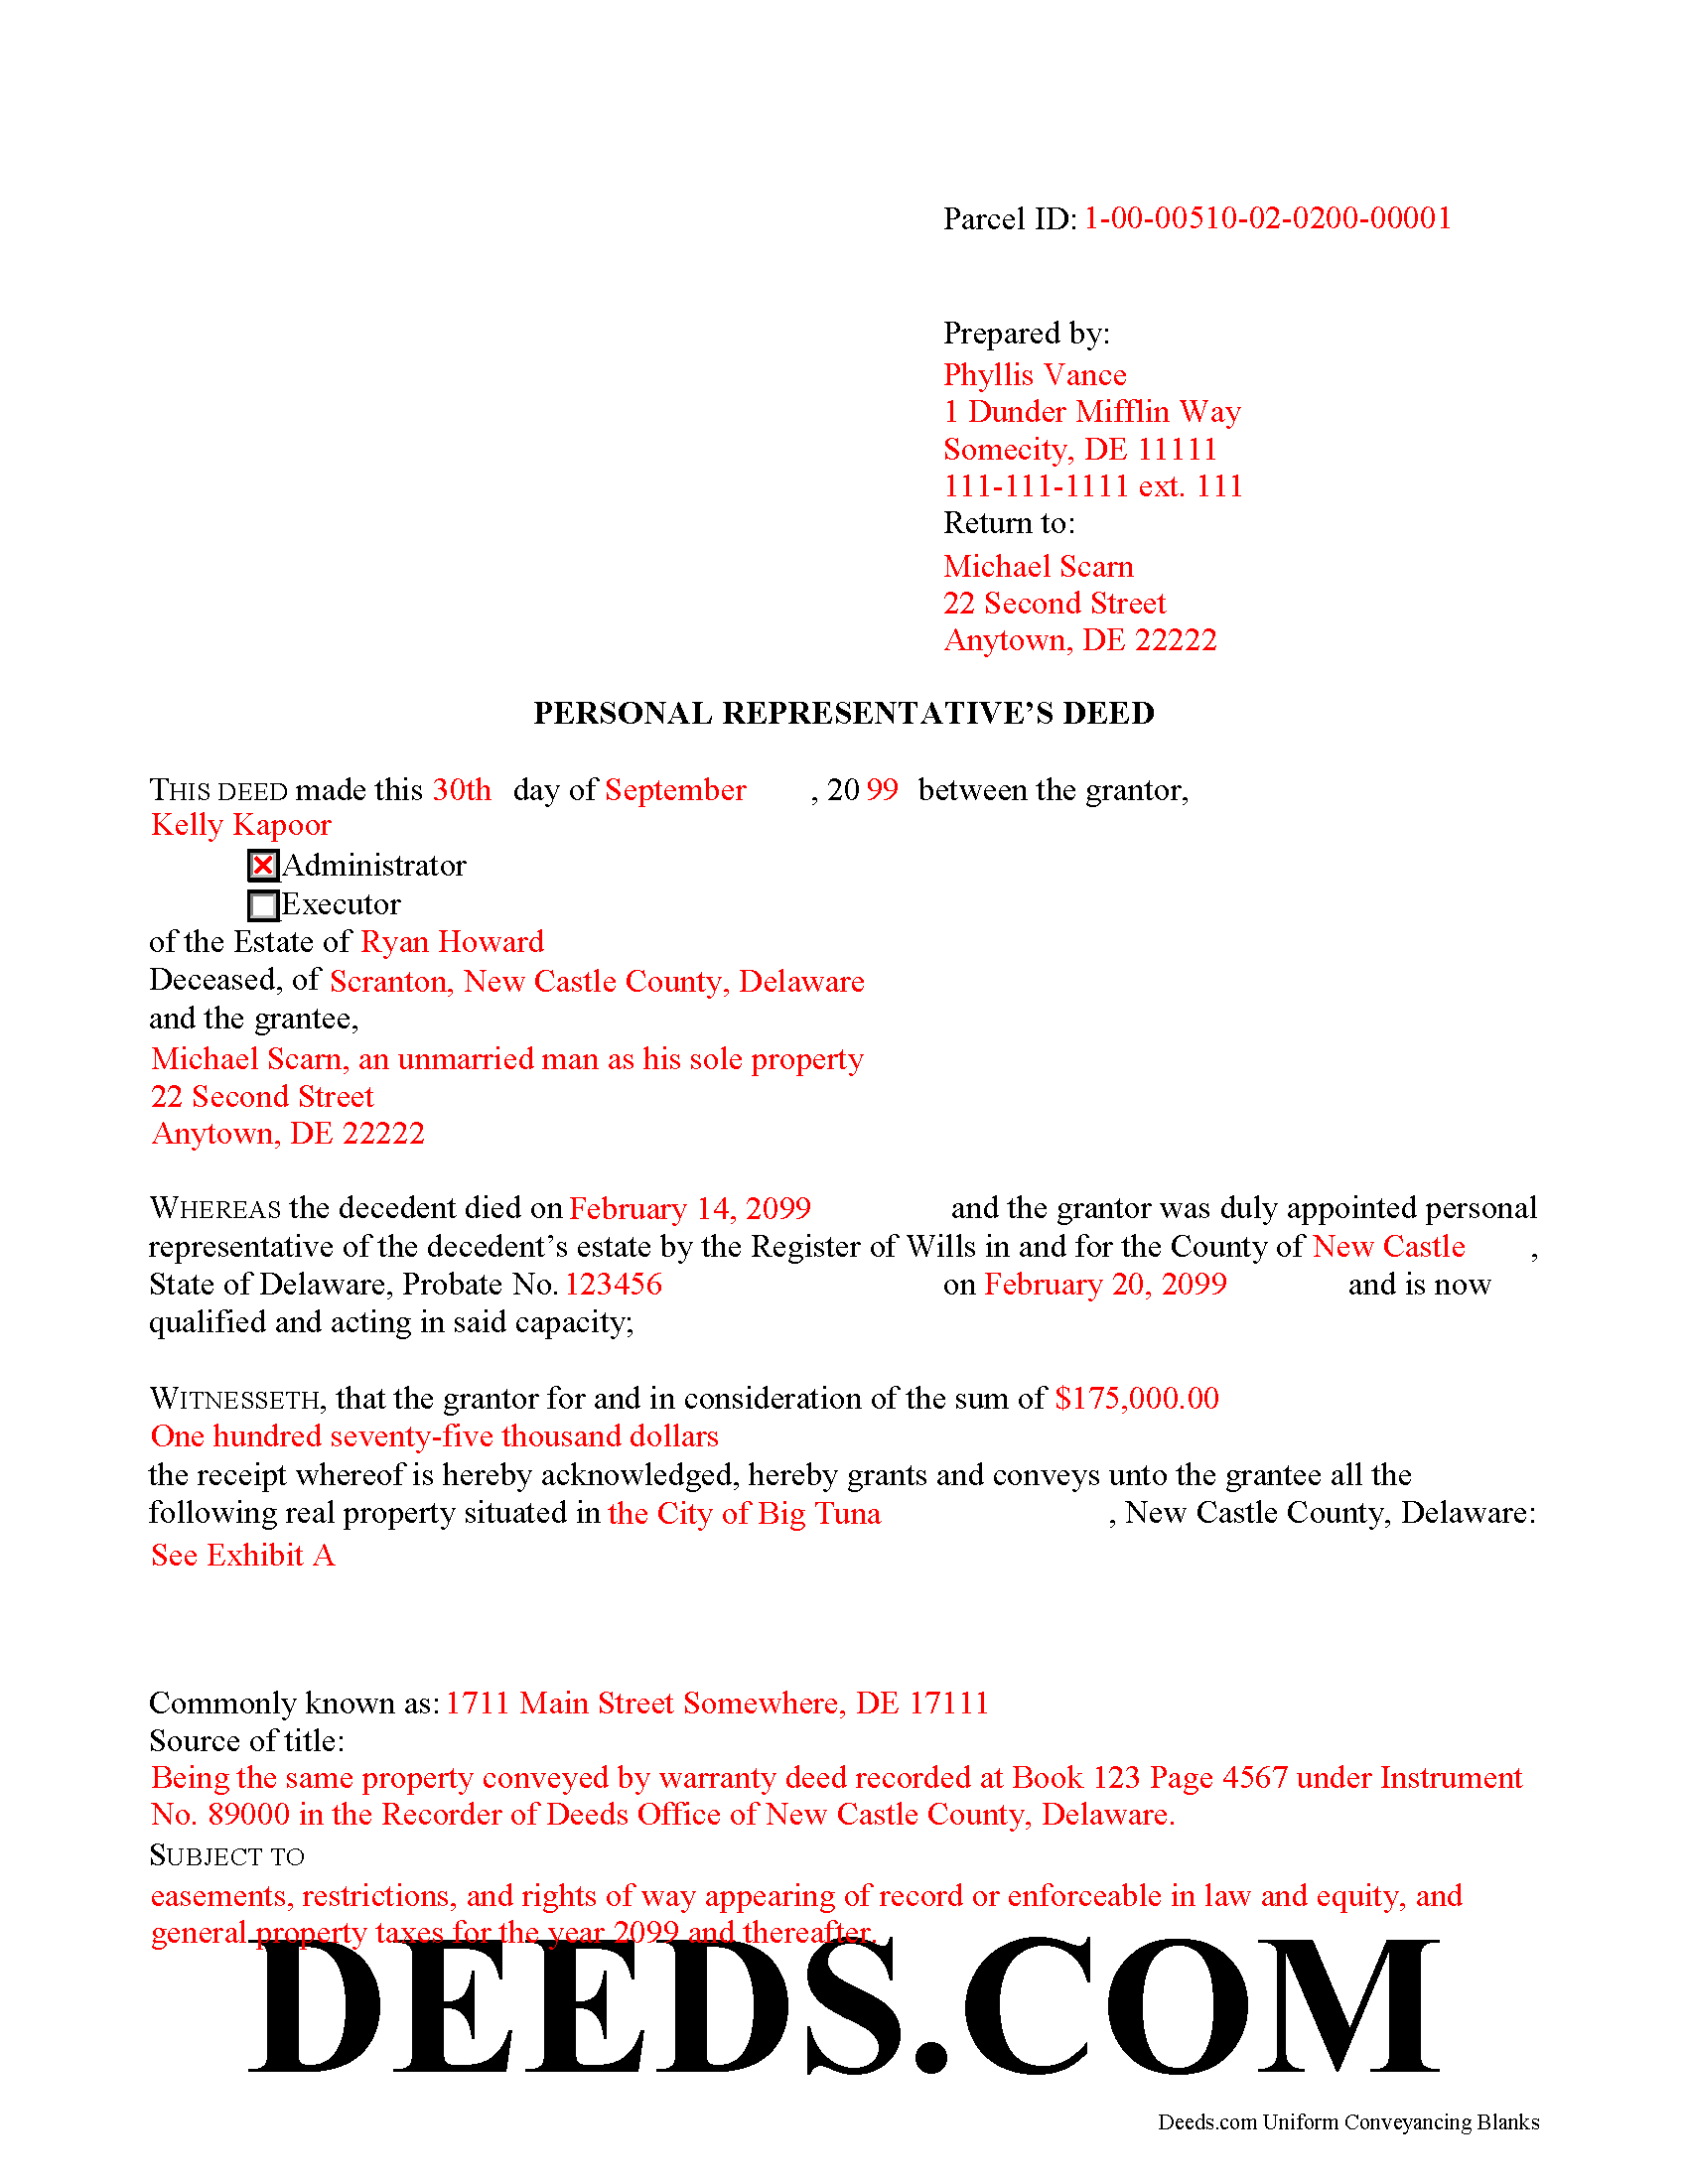 New Castle County Completed Example of the Personal Representative Deed Document Page 1